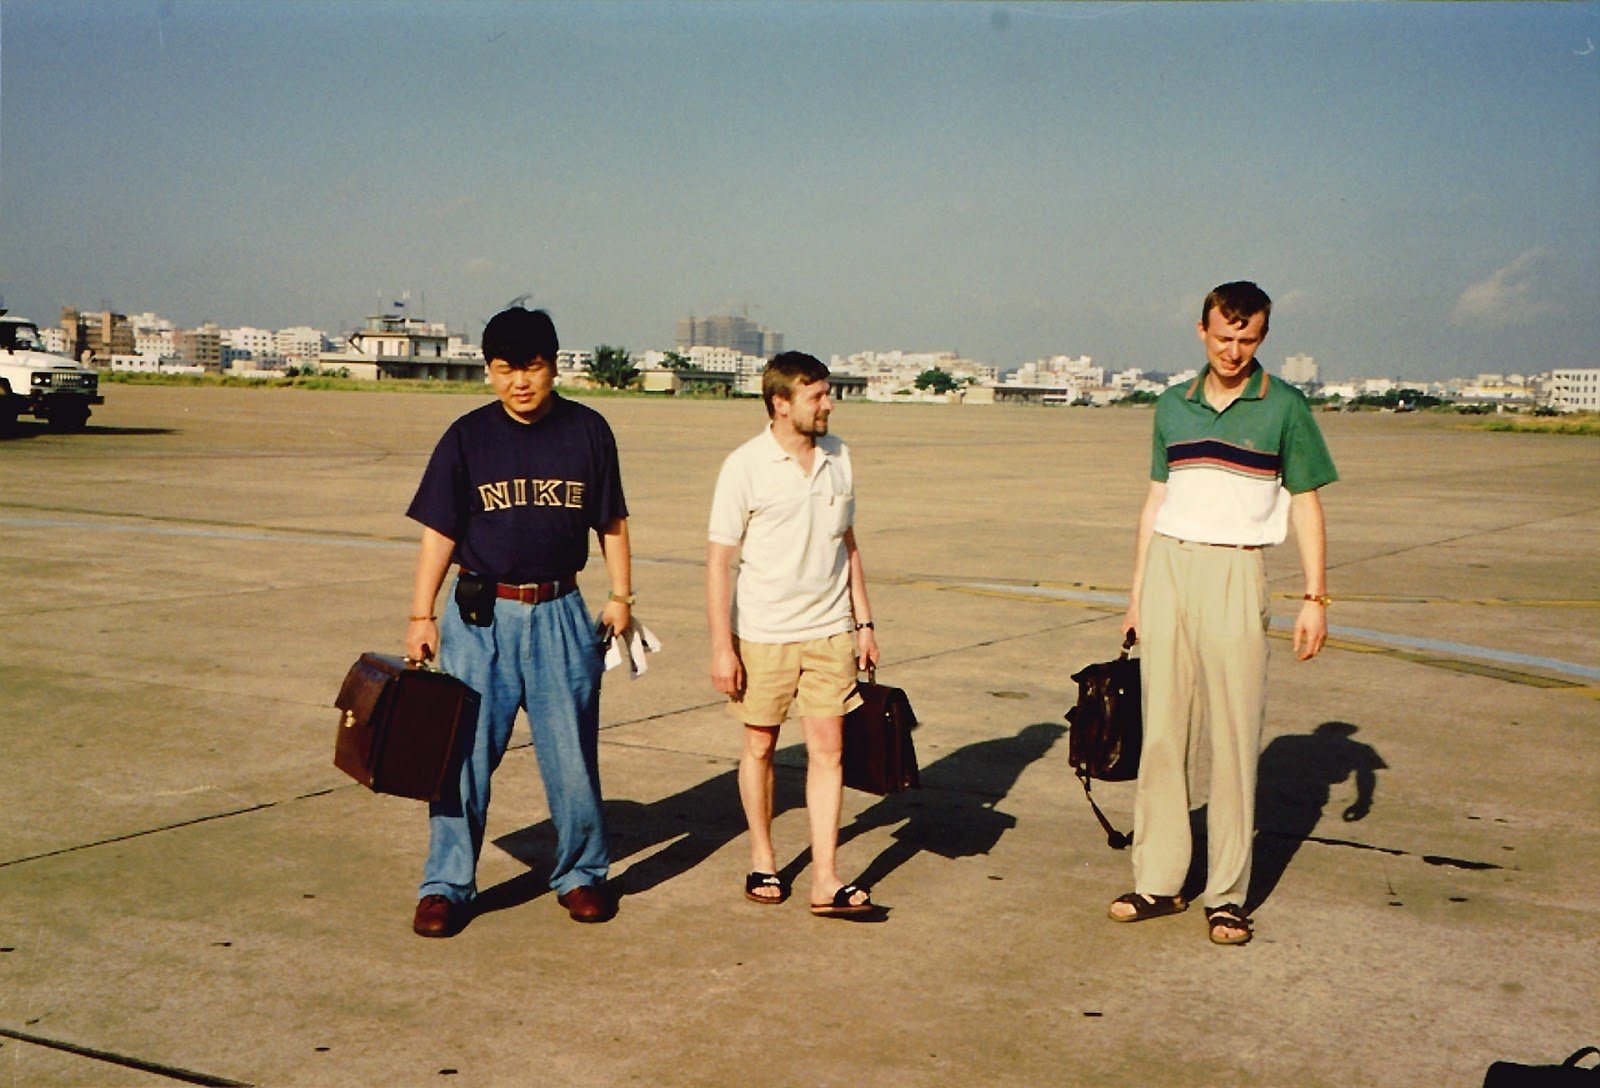 Archive photo from one of the trips to China in the mid-90s